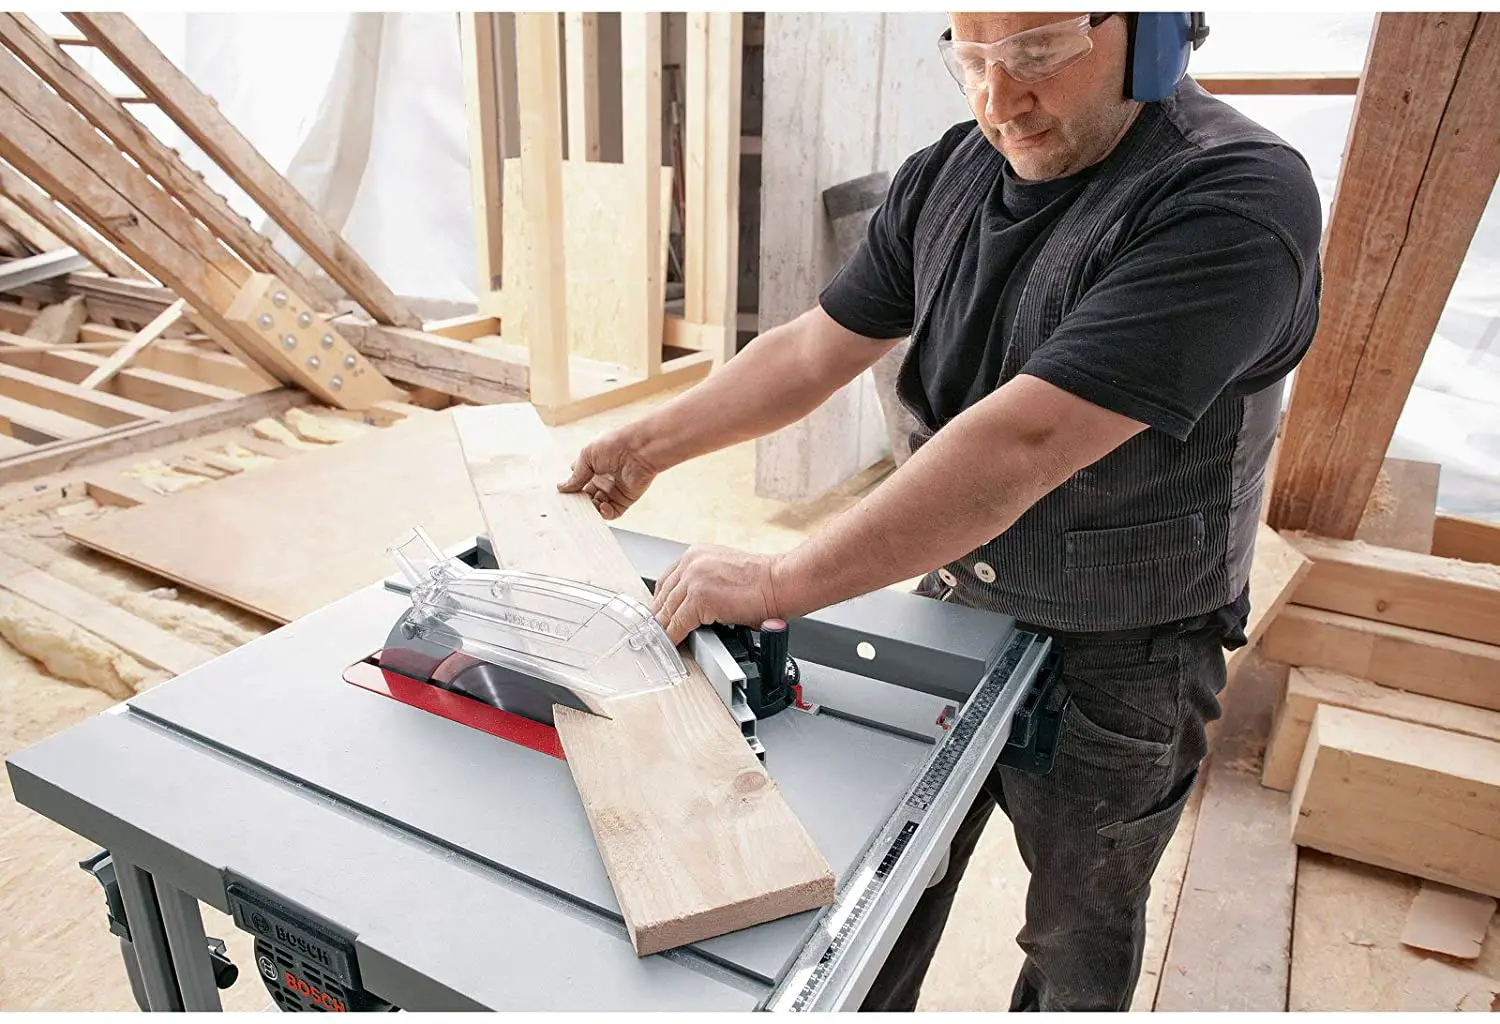 Introduction to the table saw - beginners guide